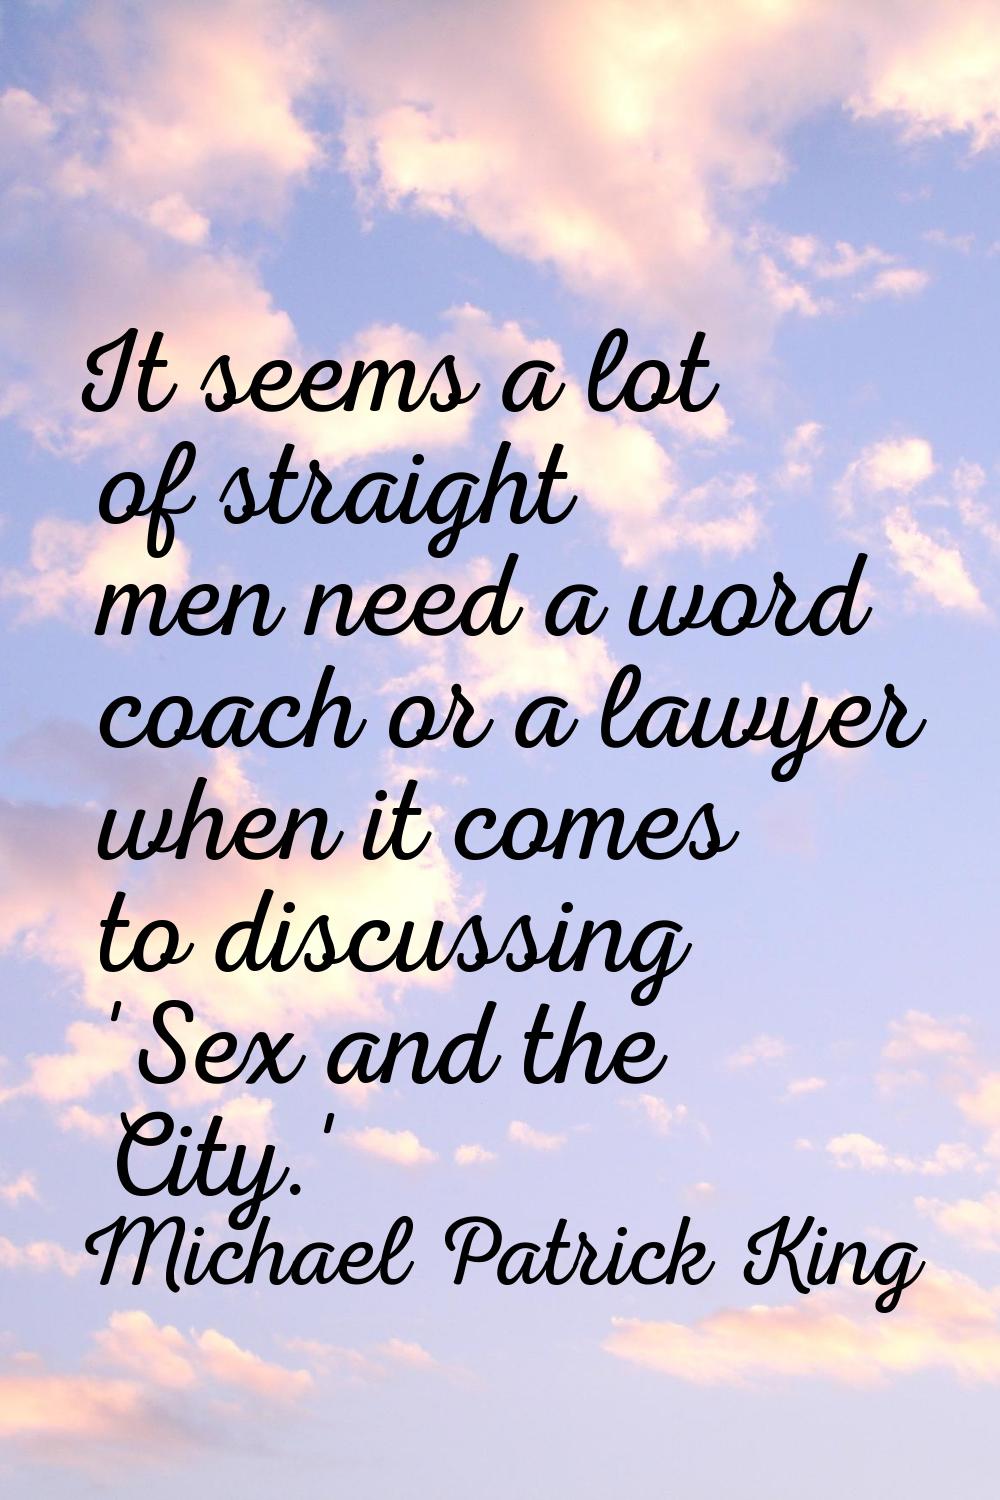 It seems a lot of straight men need a word coach or a lawyer when it comes to discussing 'Sex and t